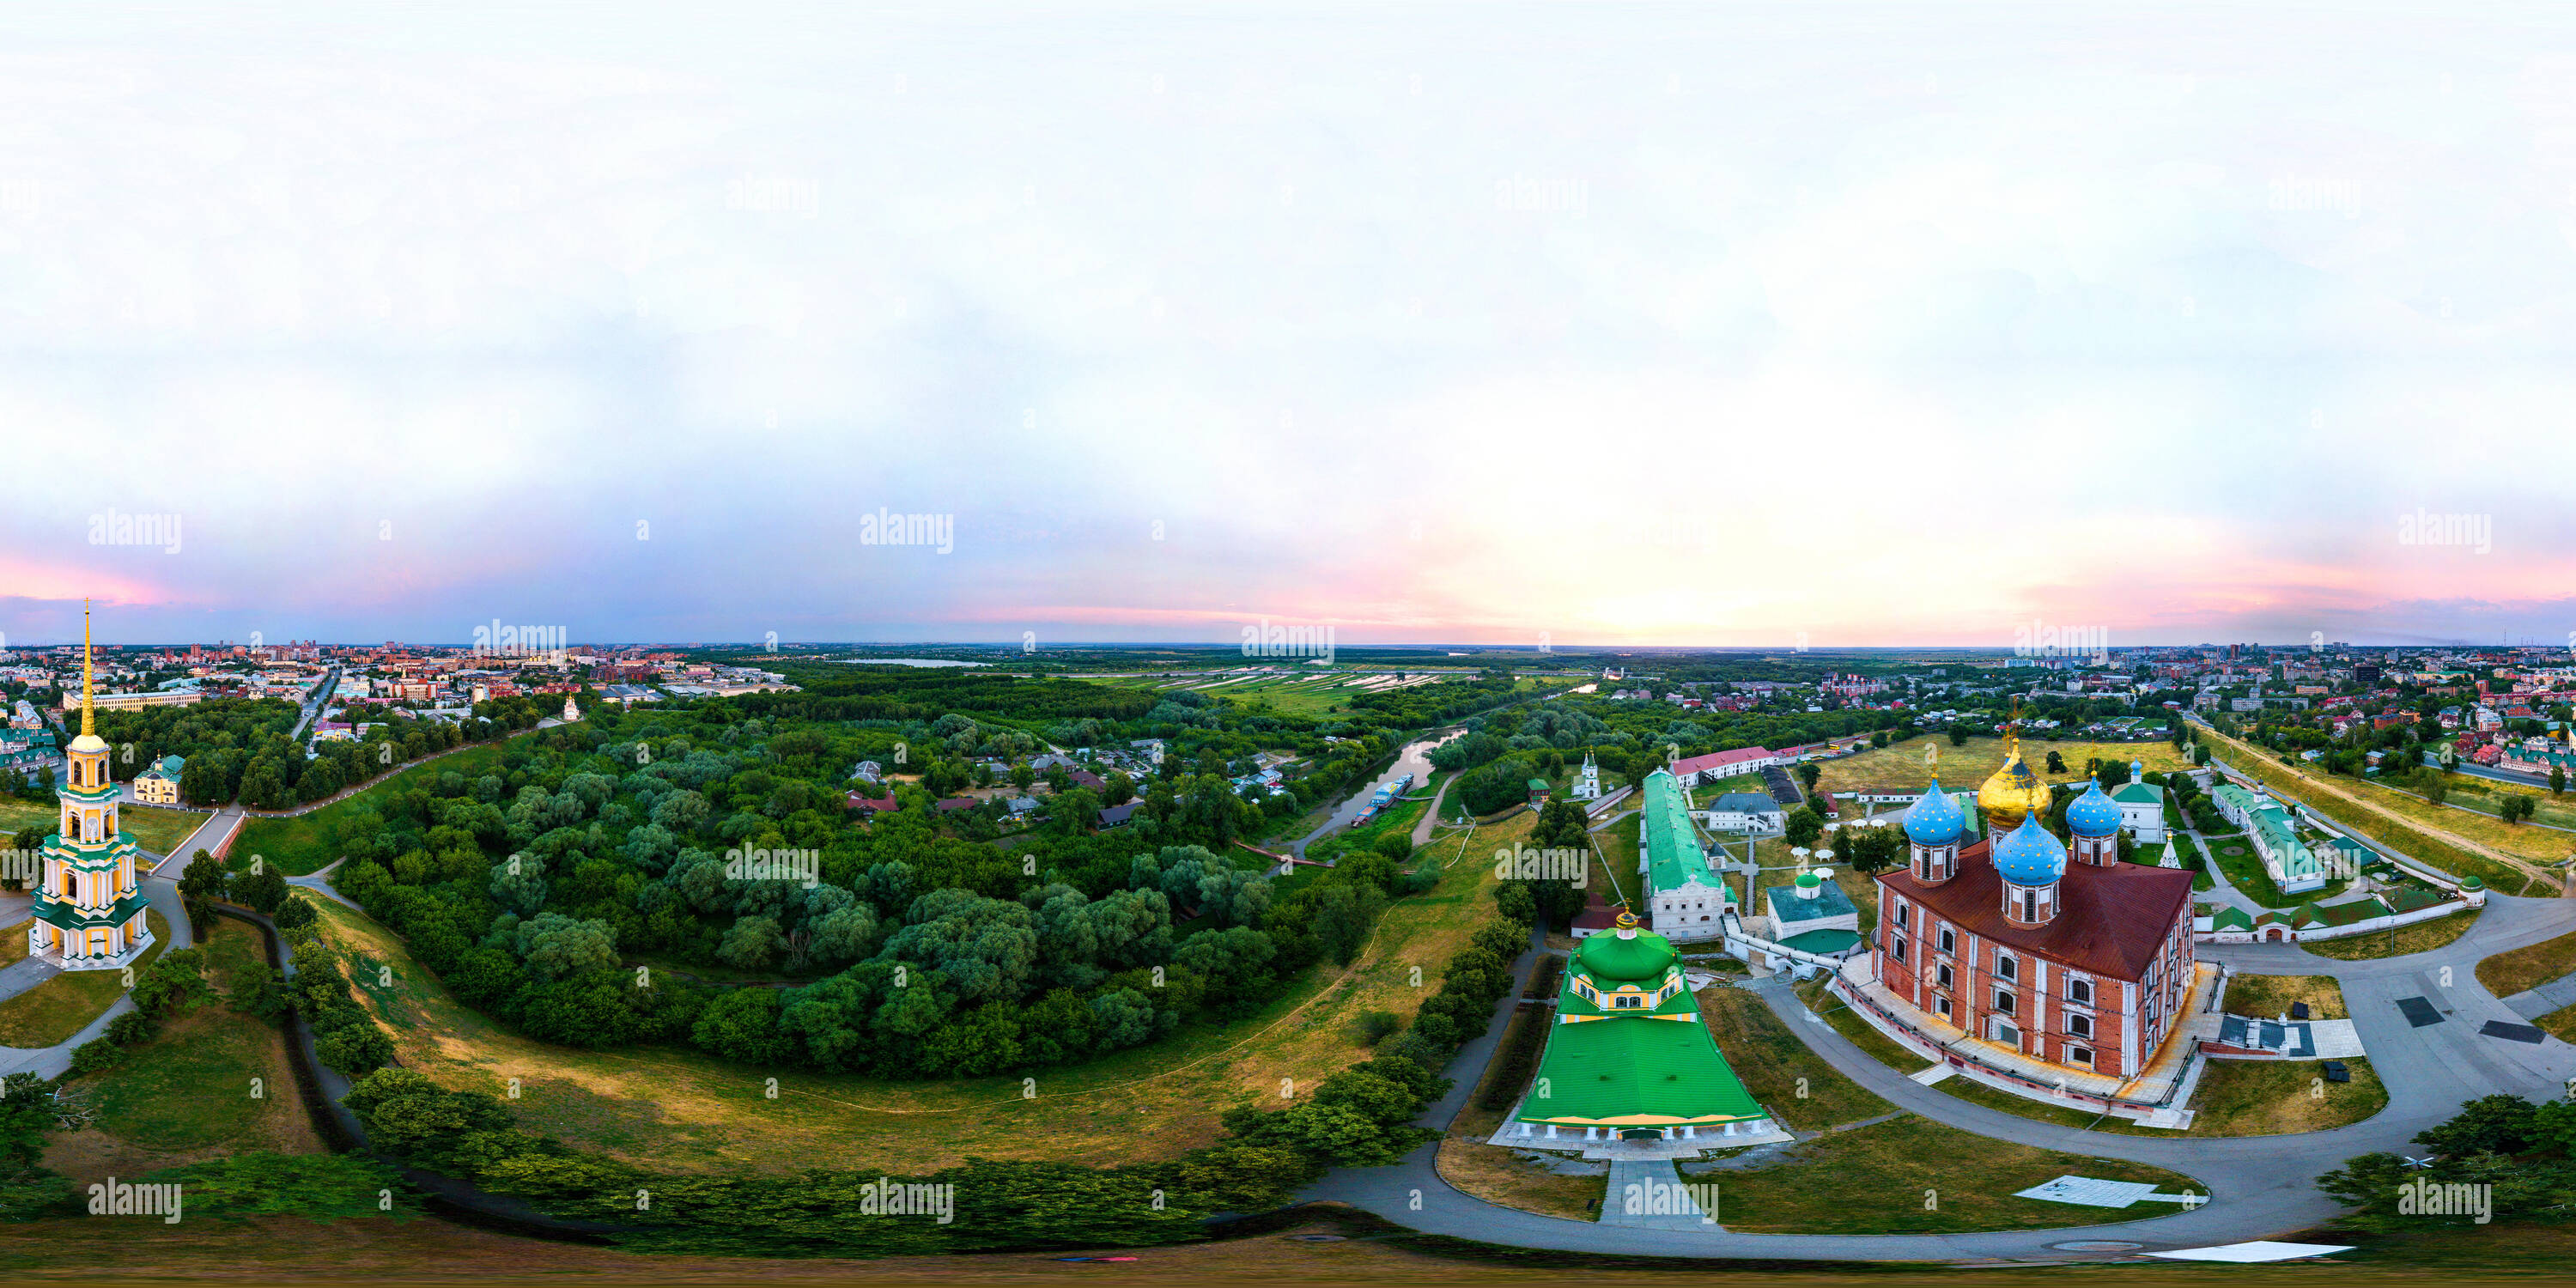 360 degree panoramic view of Ryazan, Russia. Aerial view of Bell tower and Cathedral of Ryazan Kremlin in the evening, Russia. View over the popular touristic town in Russia at su